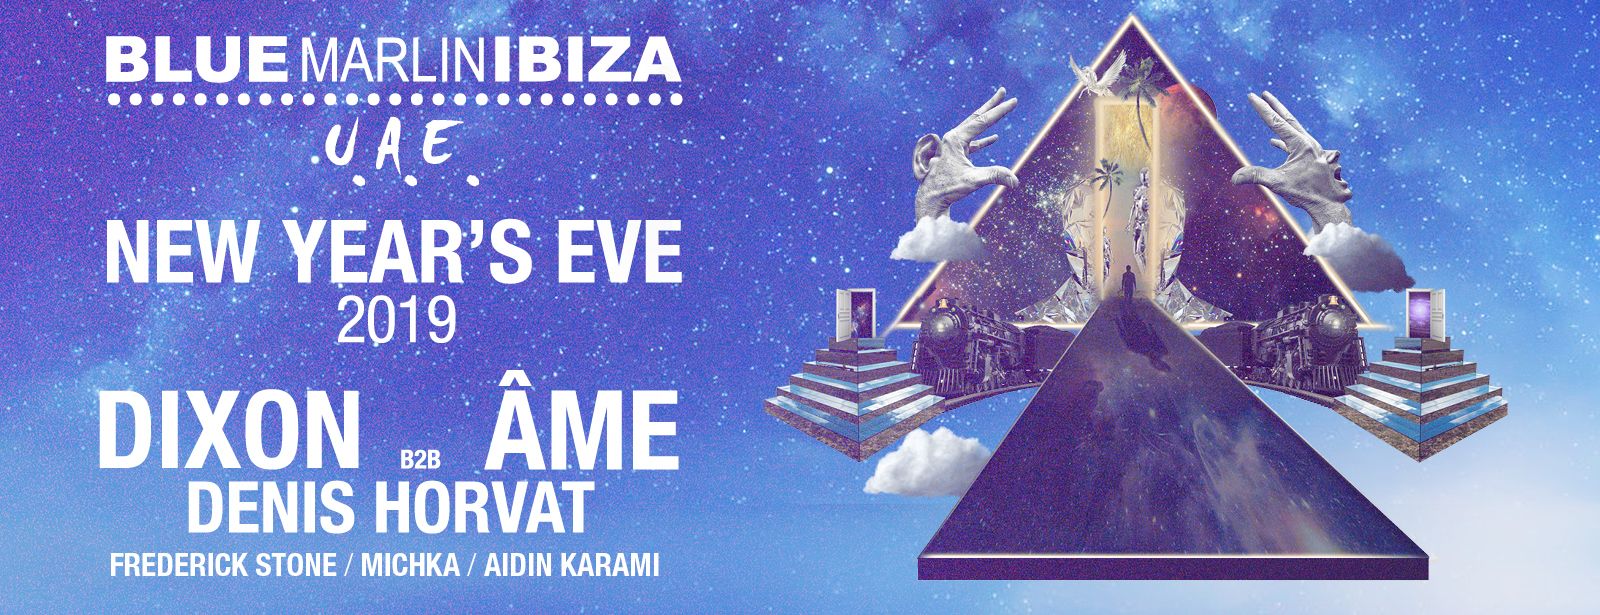 New Year’s Eve at the Blue Marlin Ibiza UAE - Coming Soon in UAE